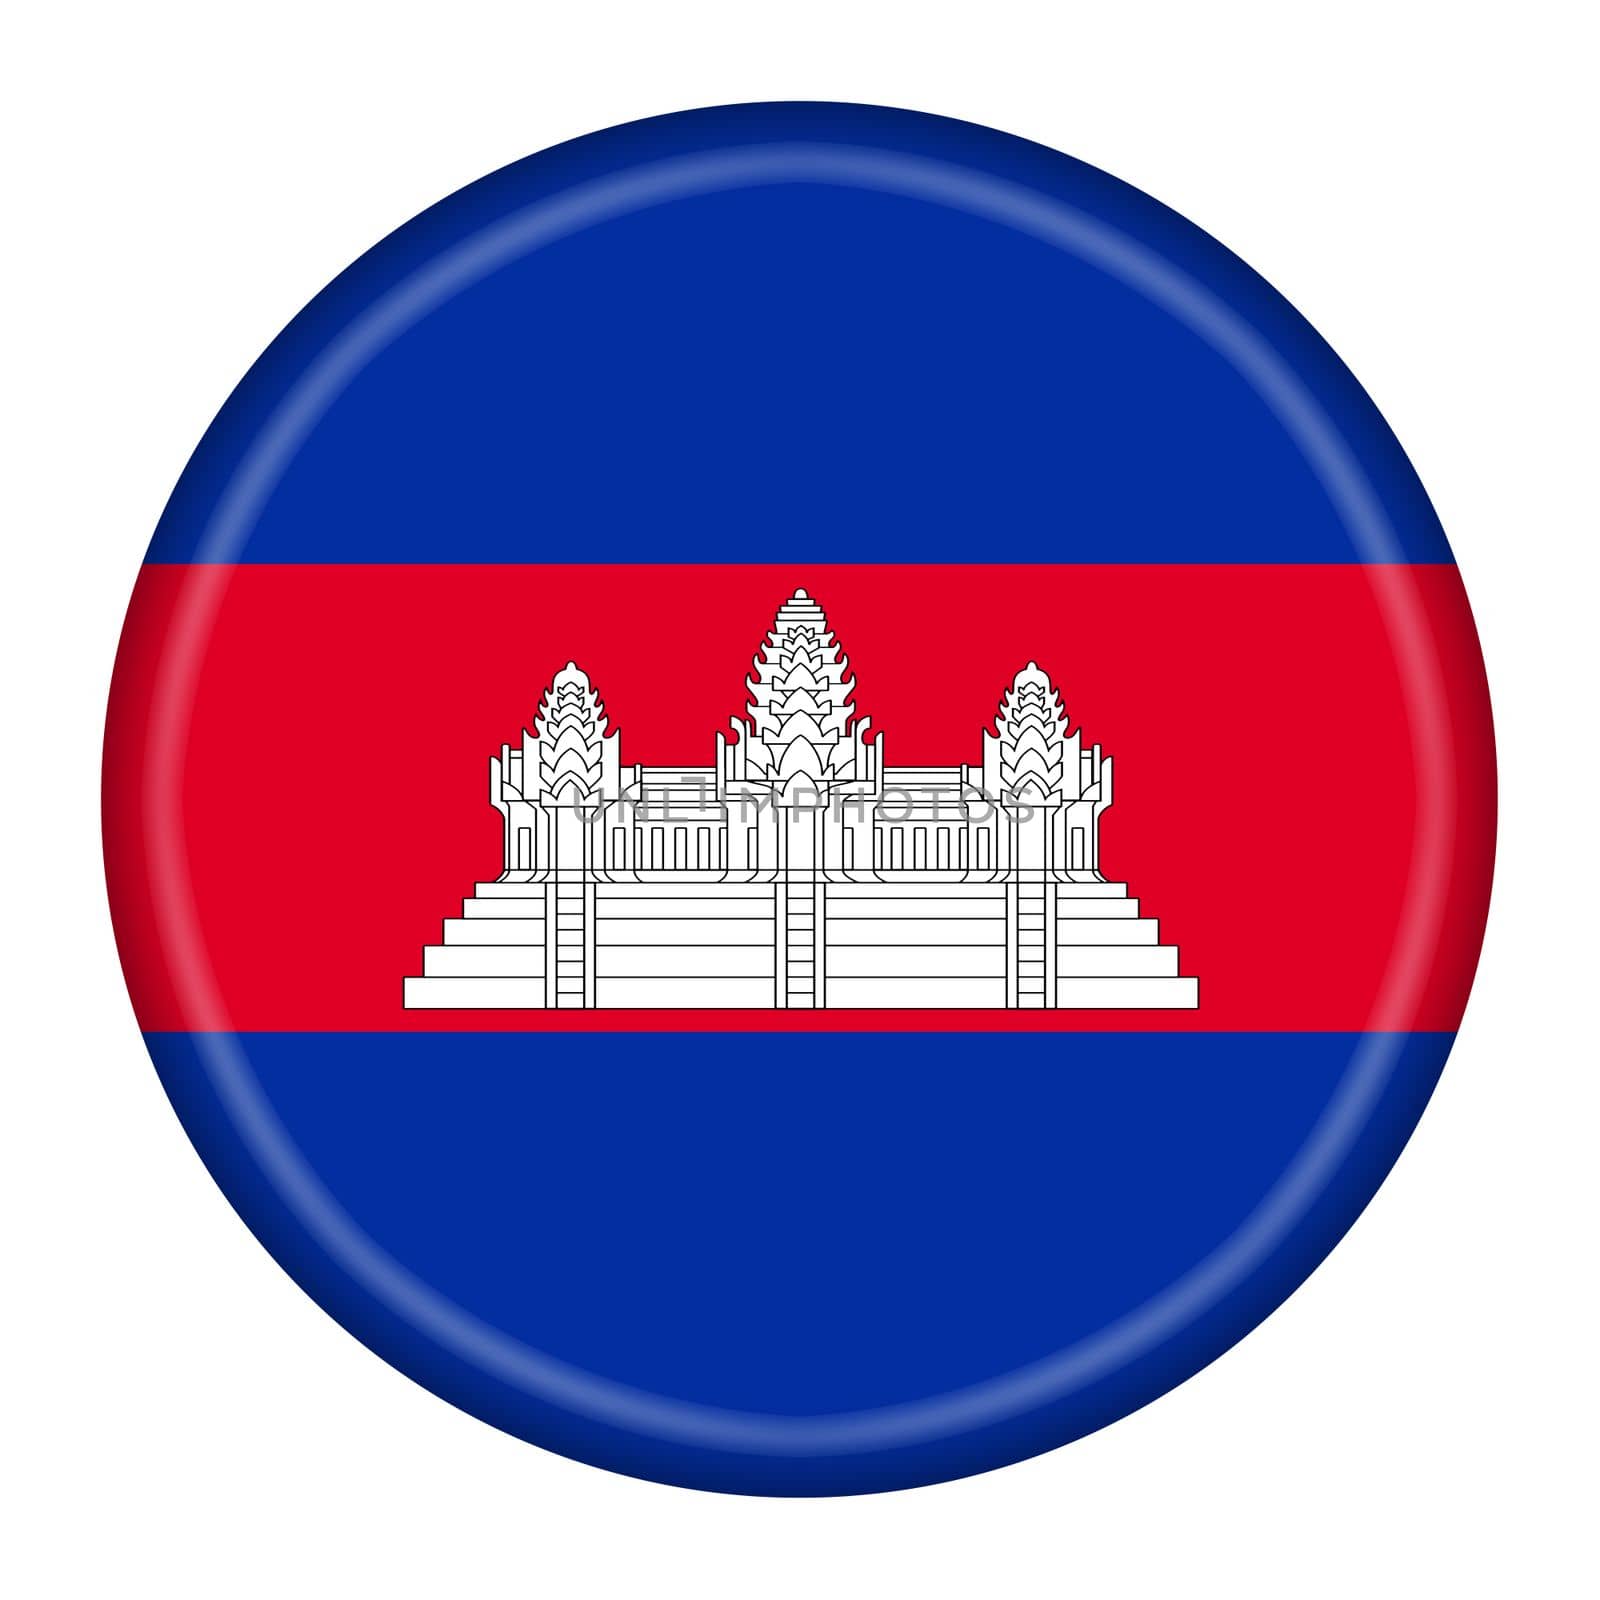 Cambodia button flag 3d illustration with clipping path by VivacityImages